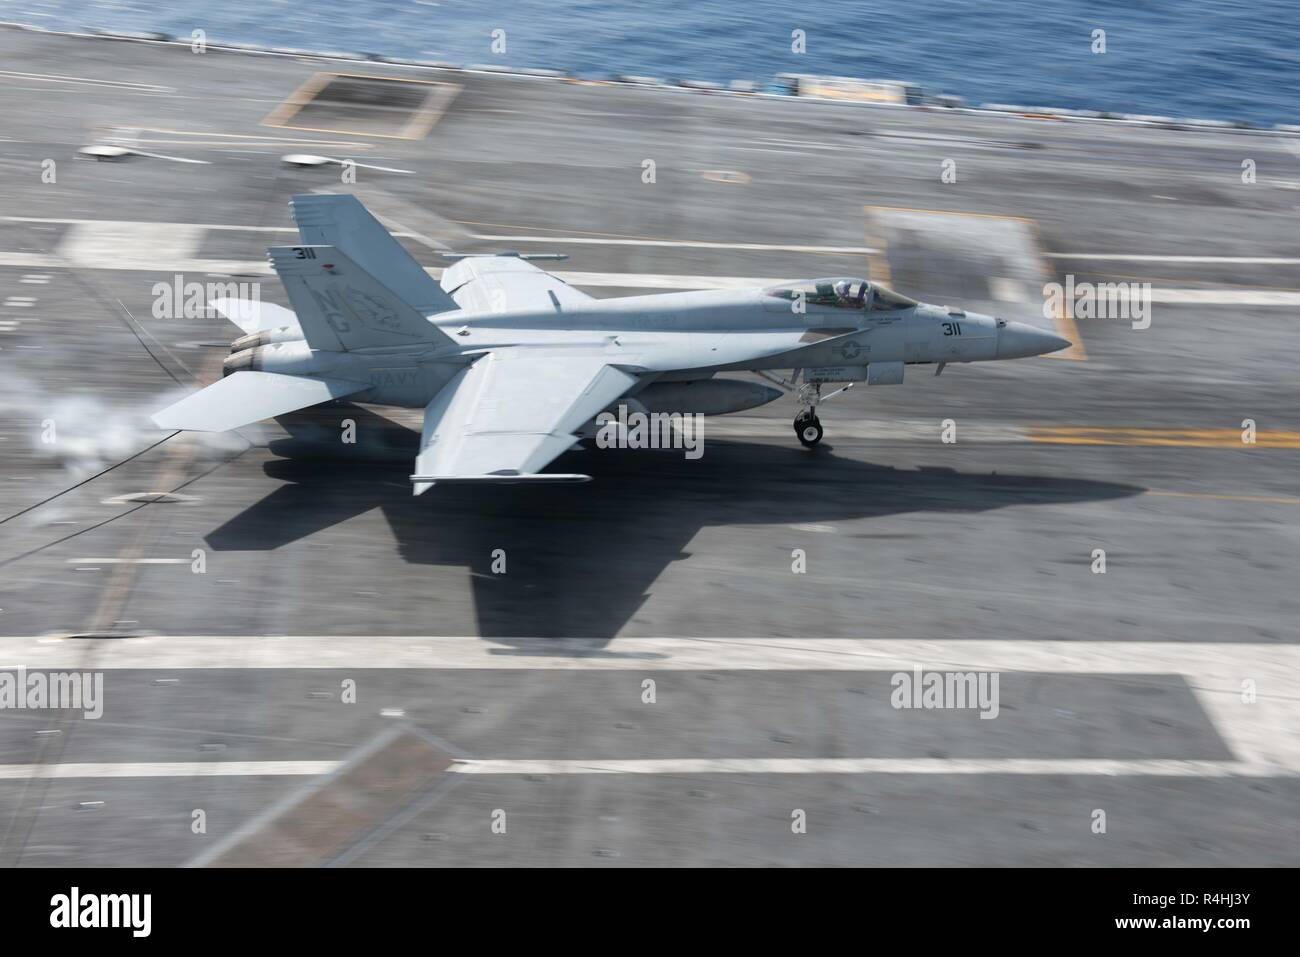 181122-N-PI076-0170    SOUTH CHINA SEA (Nov. 22, 2018) An F/A-18E Super Hornet, with Strike Fighter Squadron (VFA) 97, lands on the flight deck aboard the Nimitz-class aircraft carrier USS John C. Stennis (CVN 74). John C. Stennis is underway conducting routine operations in the U.S. Pacific Fleet area of operations. (U.S. Navy photo by Mass Communication Specialist Seaman Mitchell Banks) Stock Photo